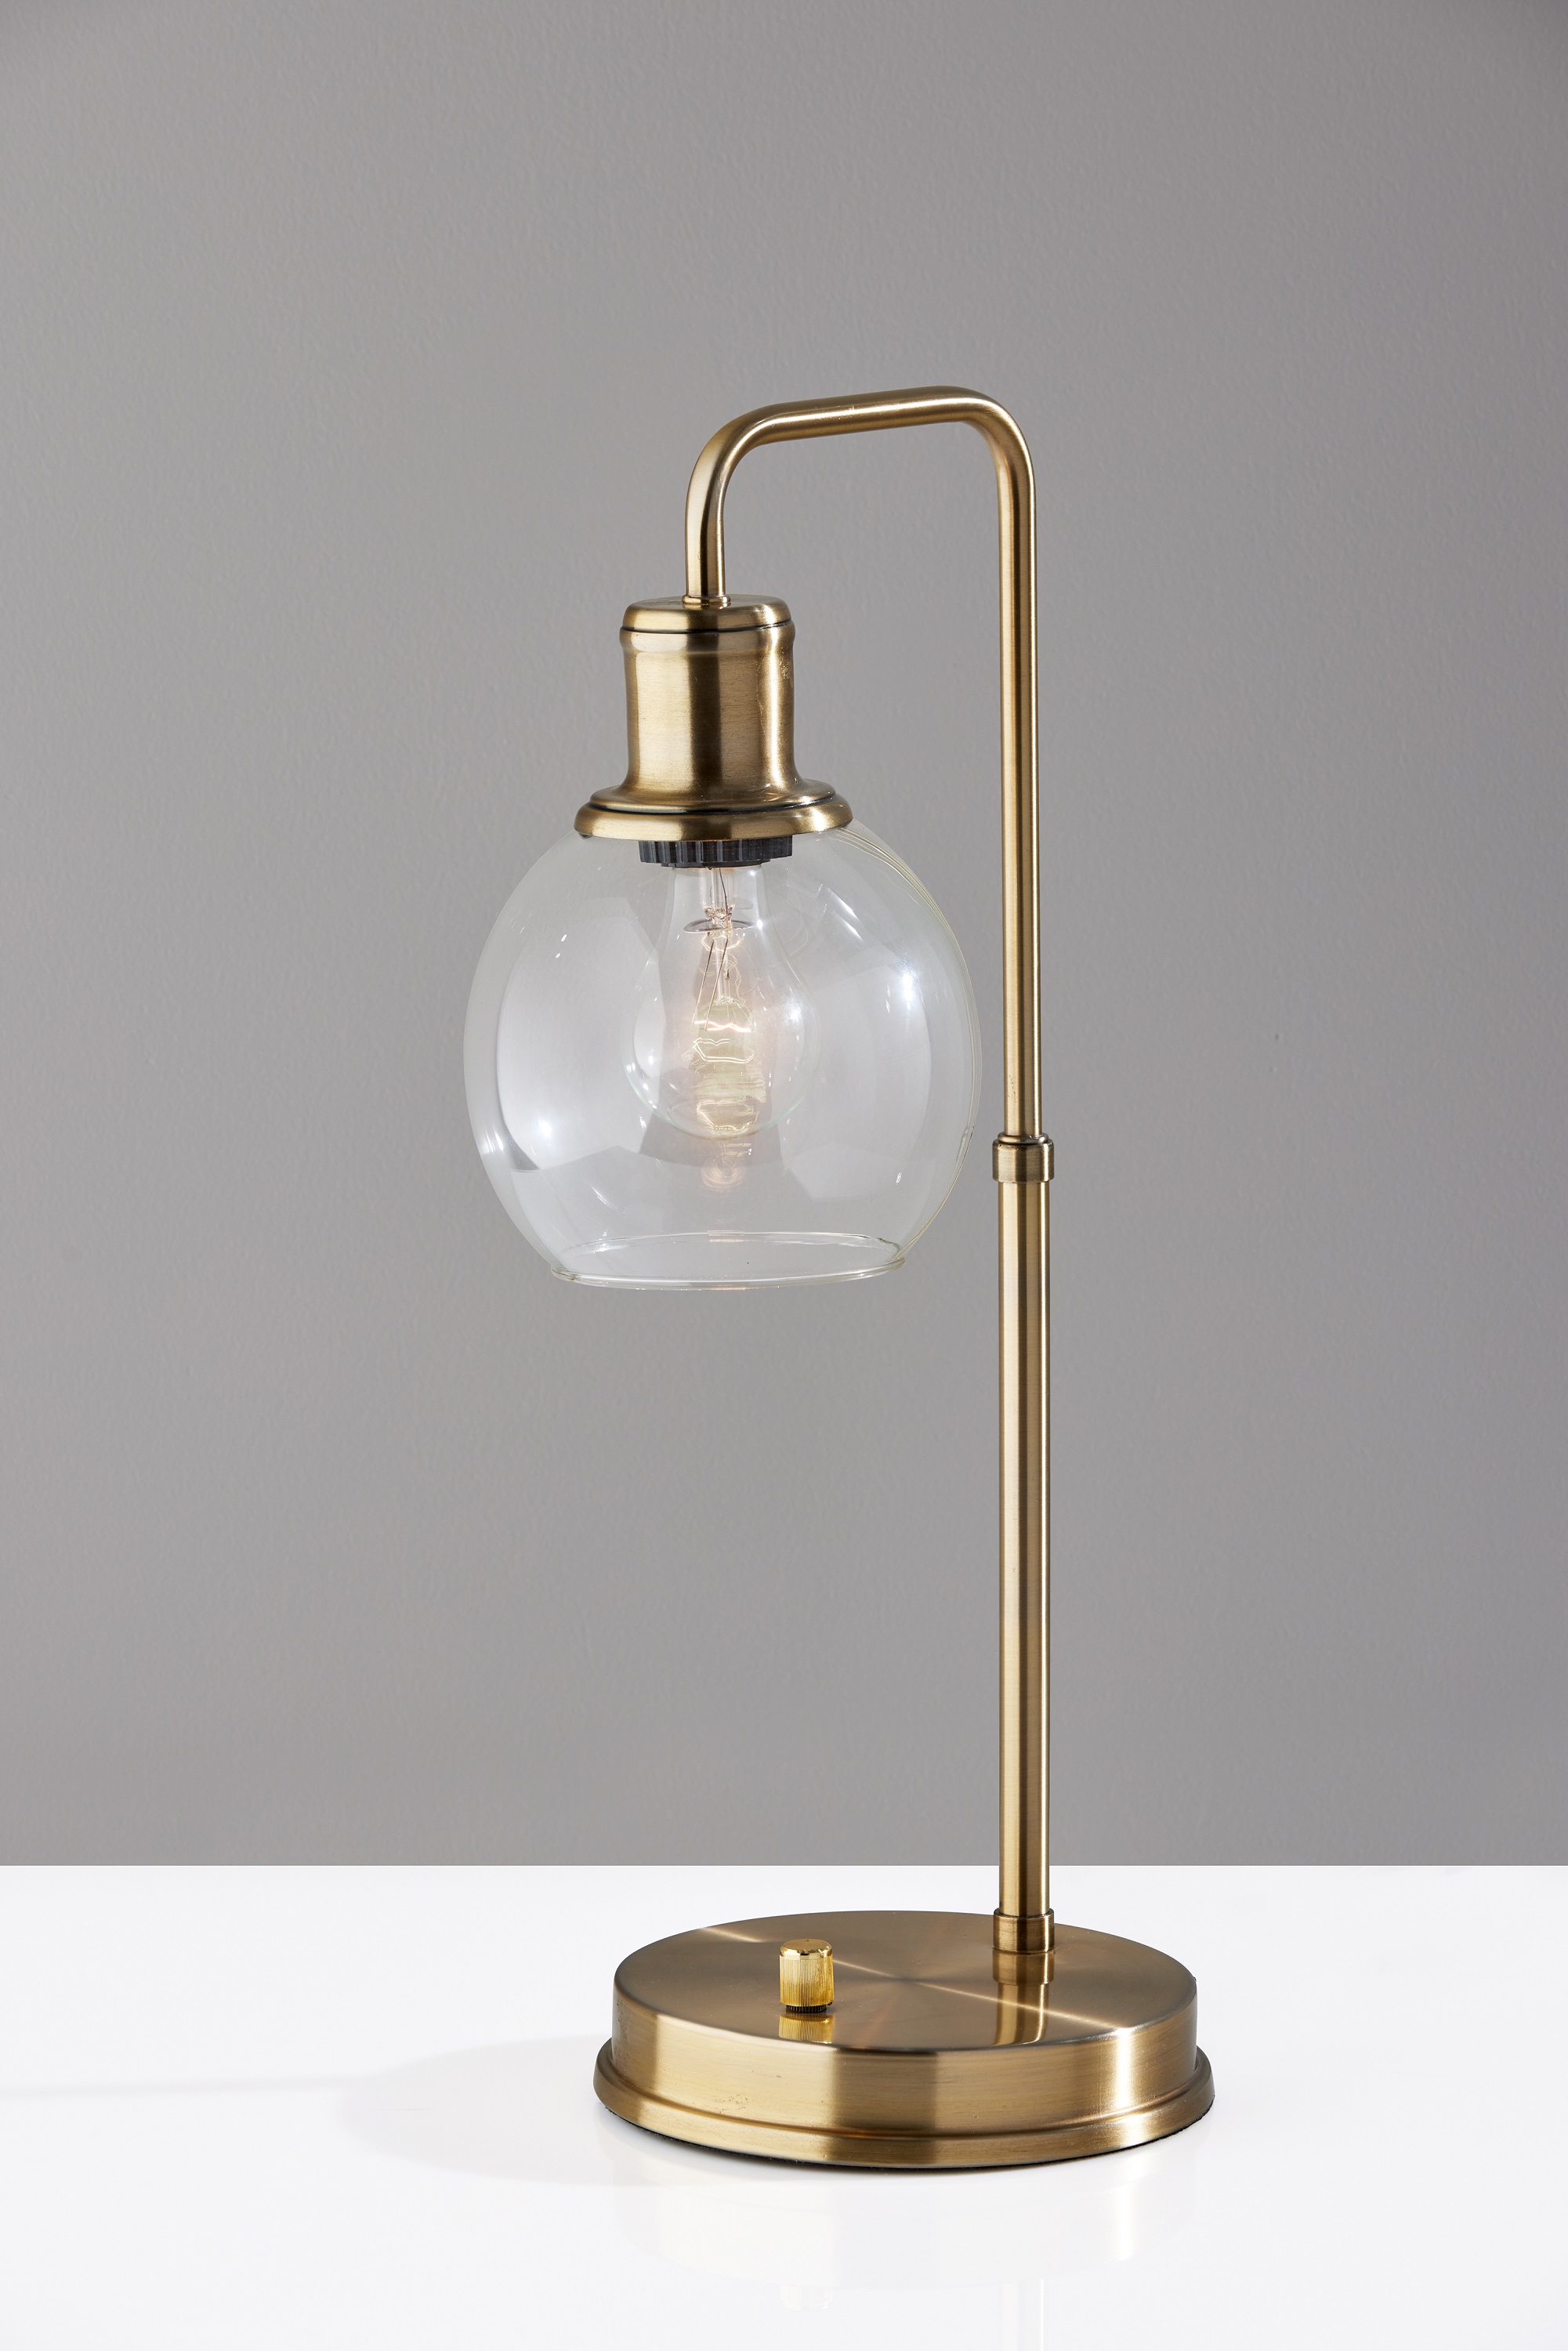 Better Homes & Gardens Gold Desk Lamp with a Glass Shade & AC Outlet ...